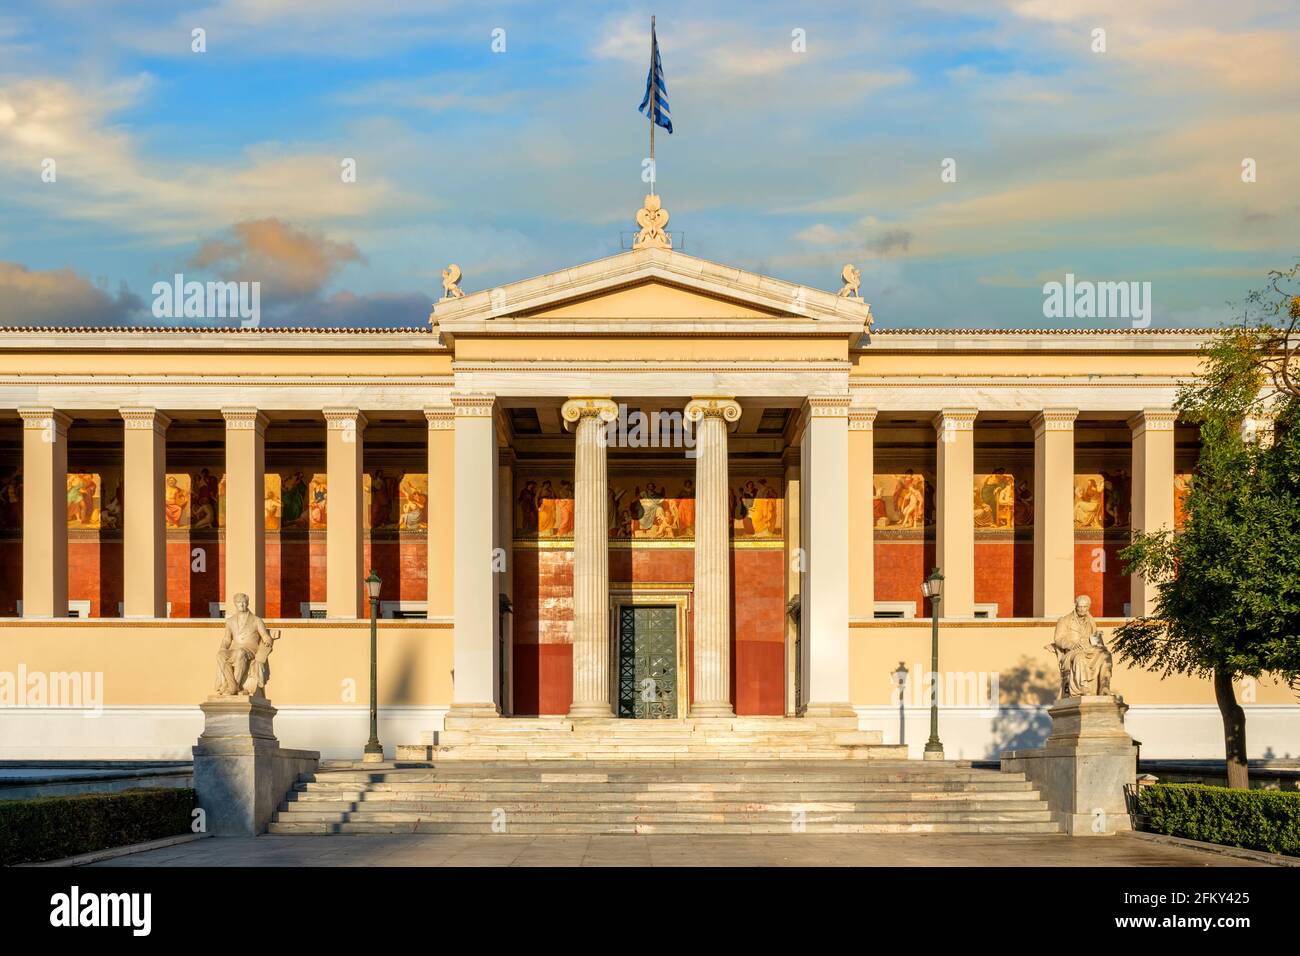 Athens, Attica, Greece. The National and Kapodistrian University of Athens neoclassical building. Facade view at sunset time with colorful cloudy sky Stock Photo